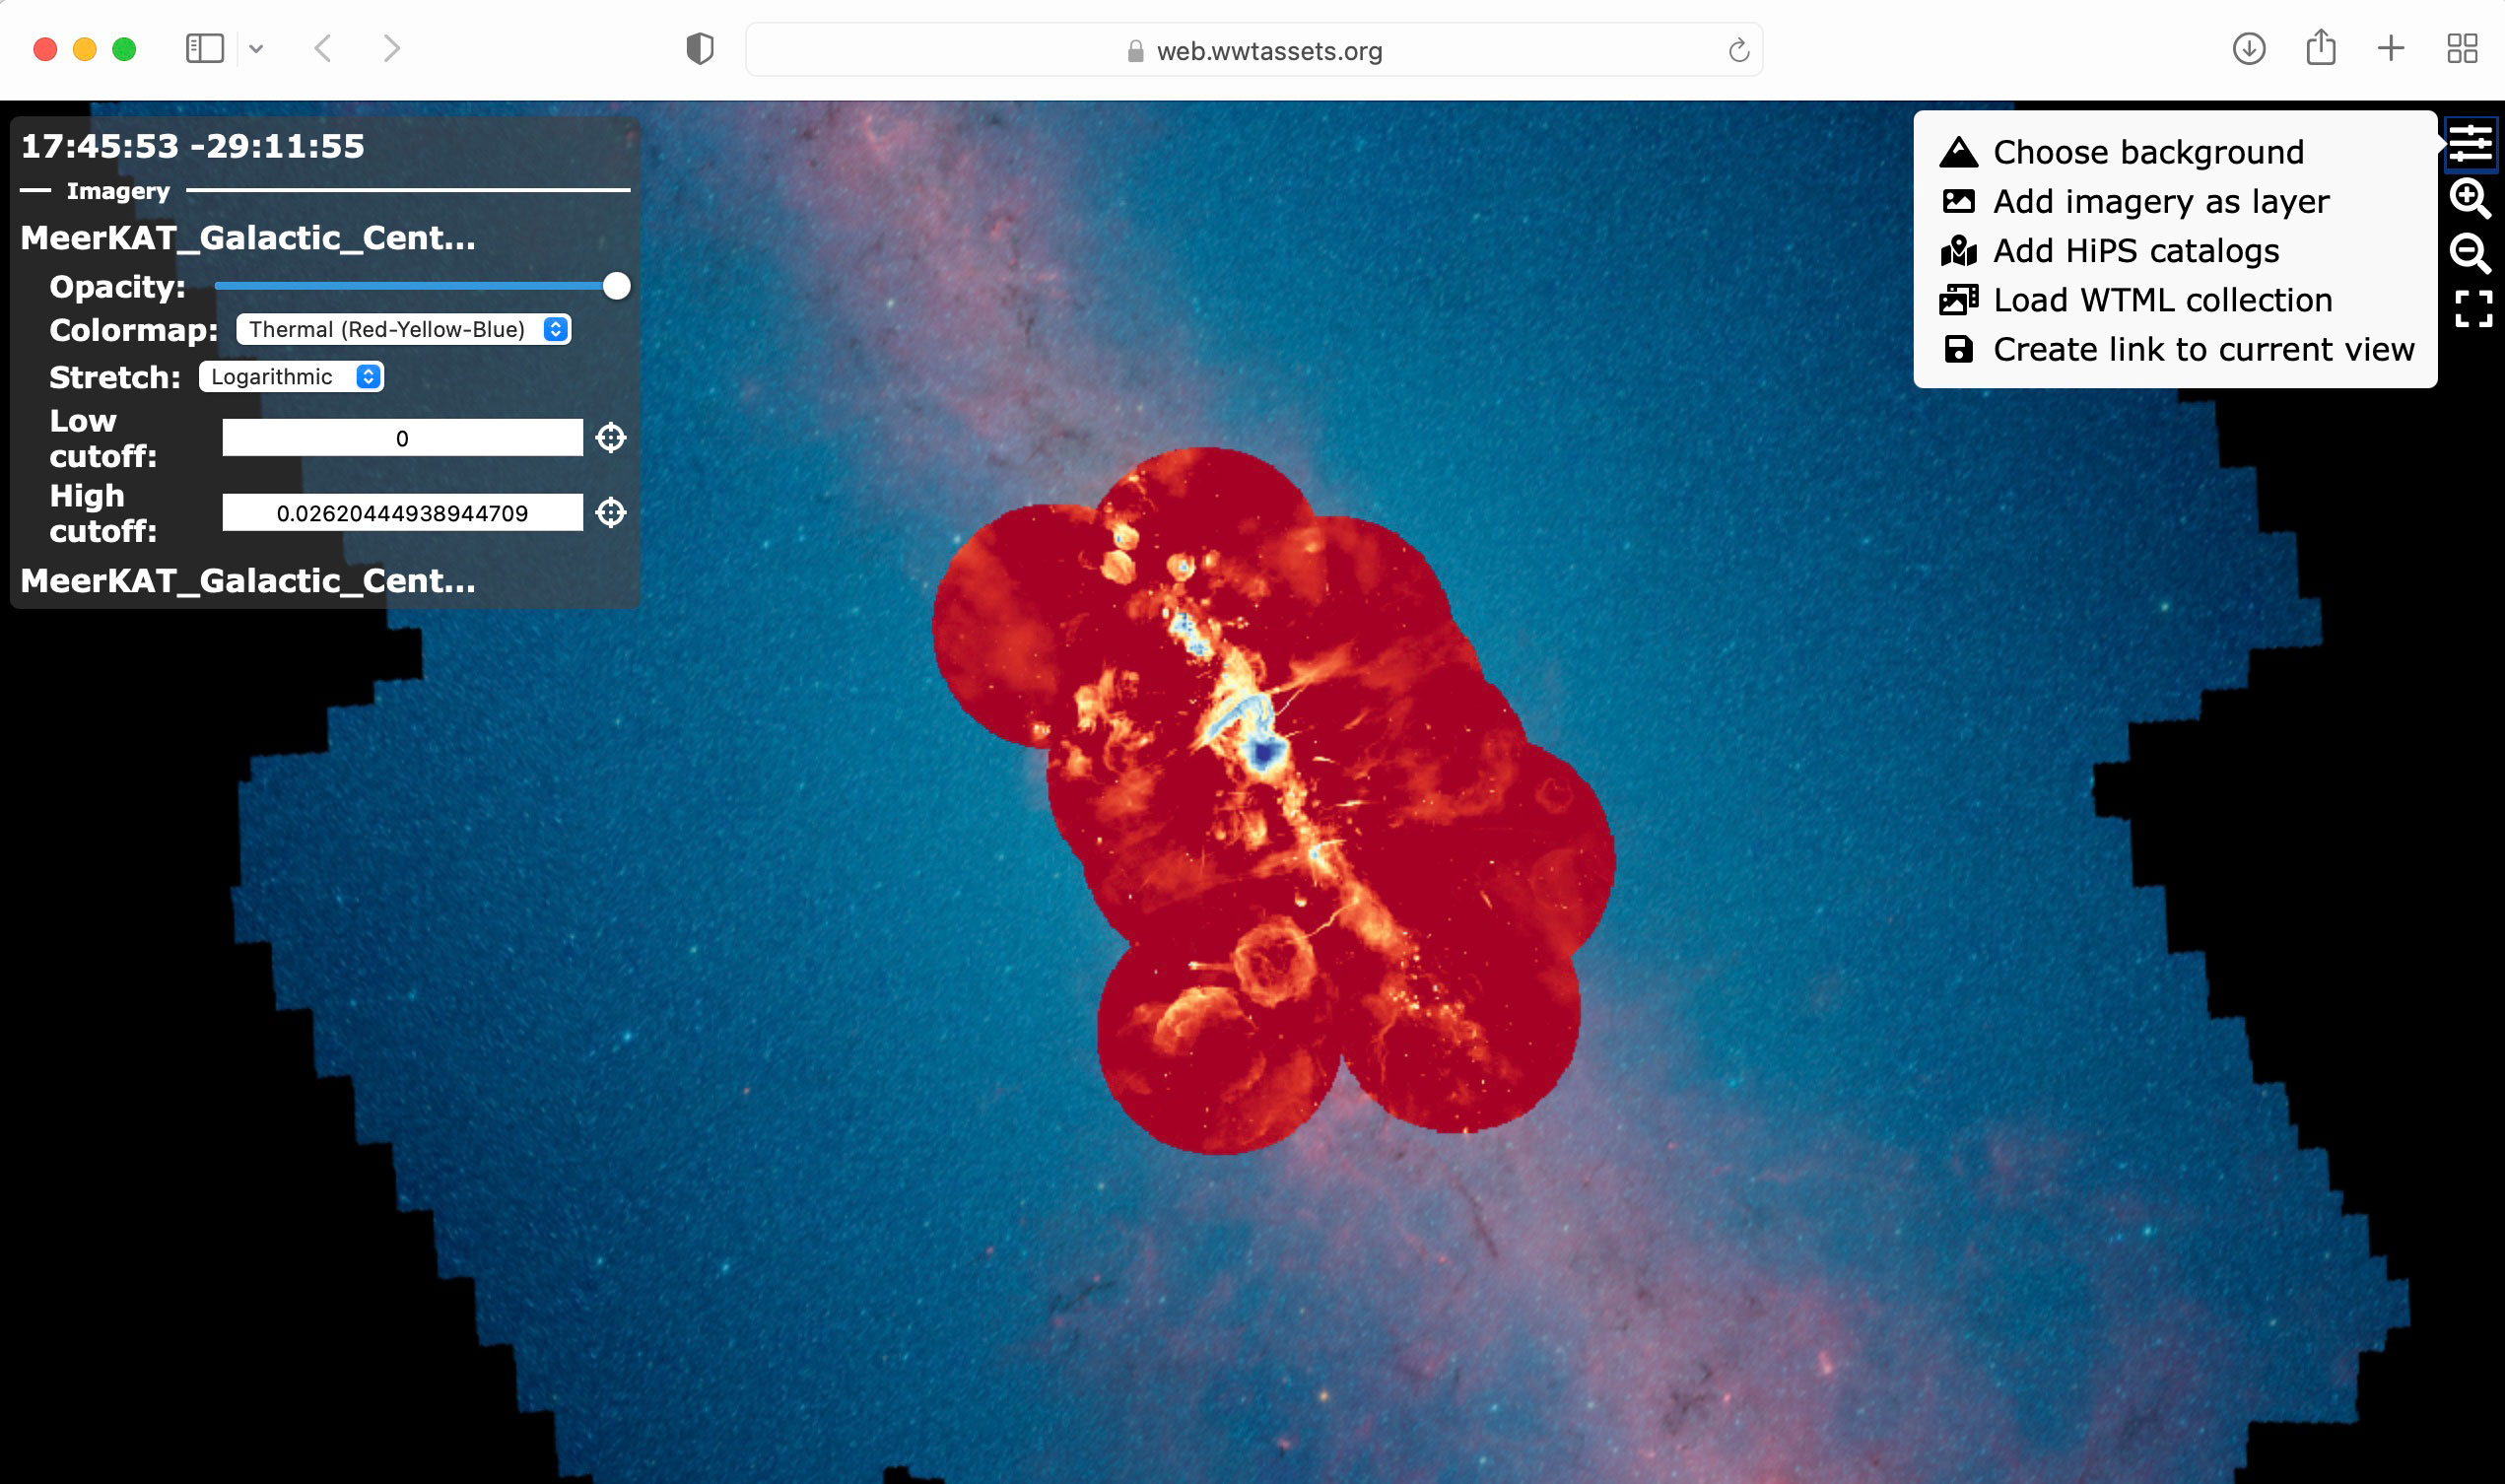 Screenshot showing use of the in-browser version of WWT to explore MeerKAT radio data of the galactic center.